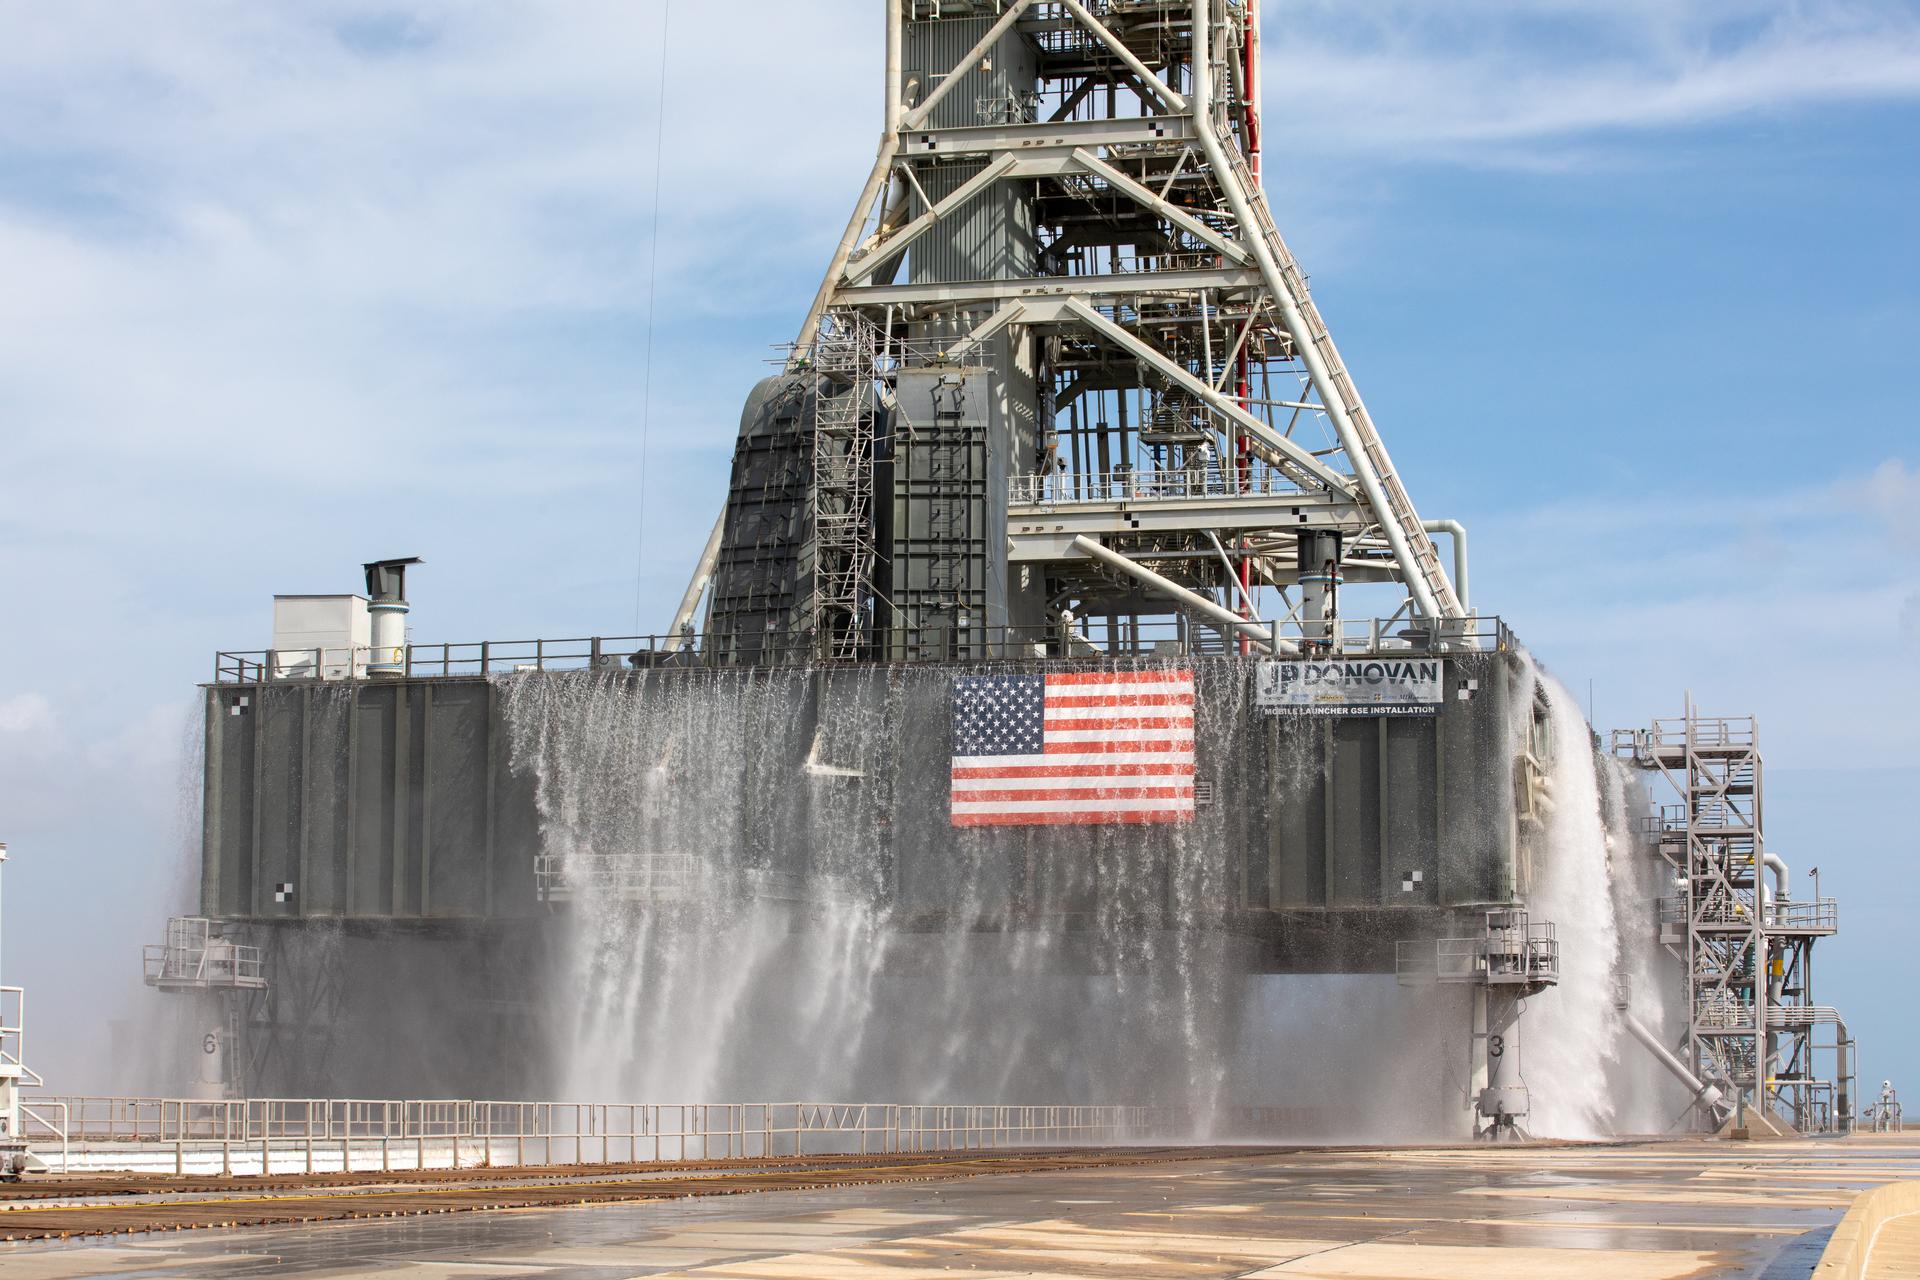 A water flow test was conducted on Sept. 30, 2019 at Launch Pad 39B at NASA's Kennedy Space Center in Florida.